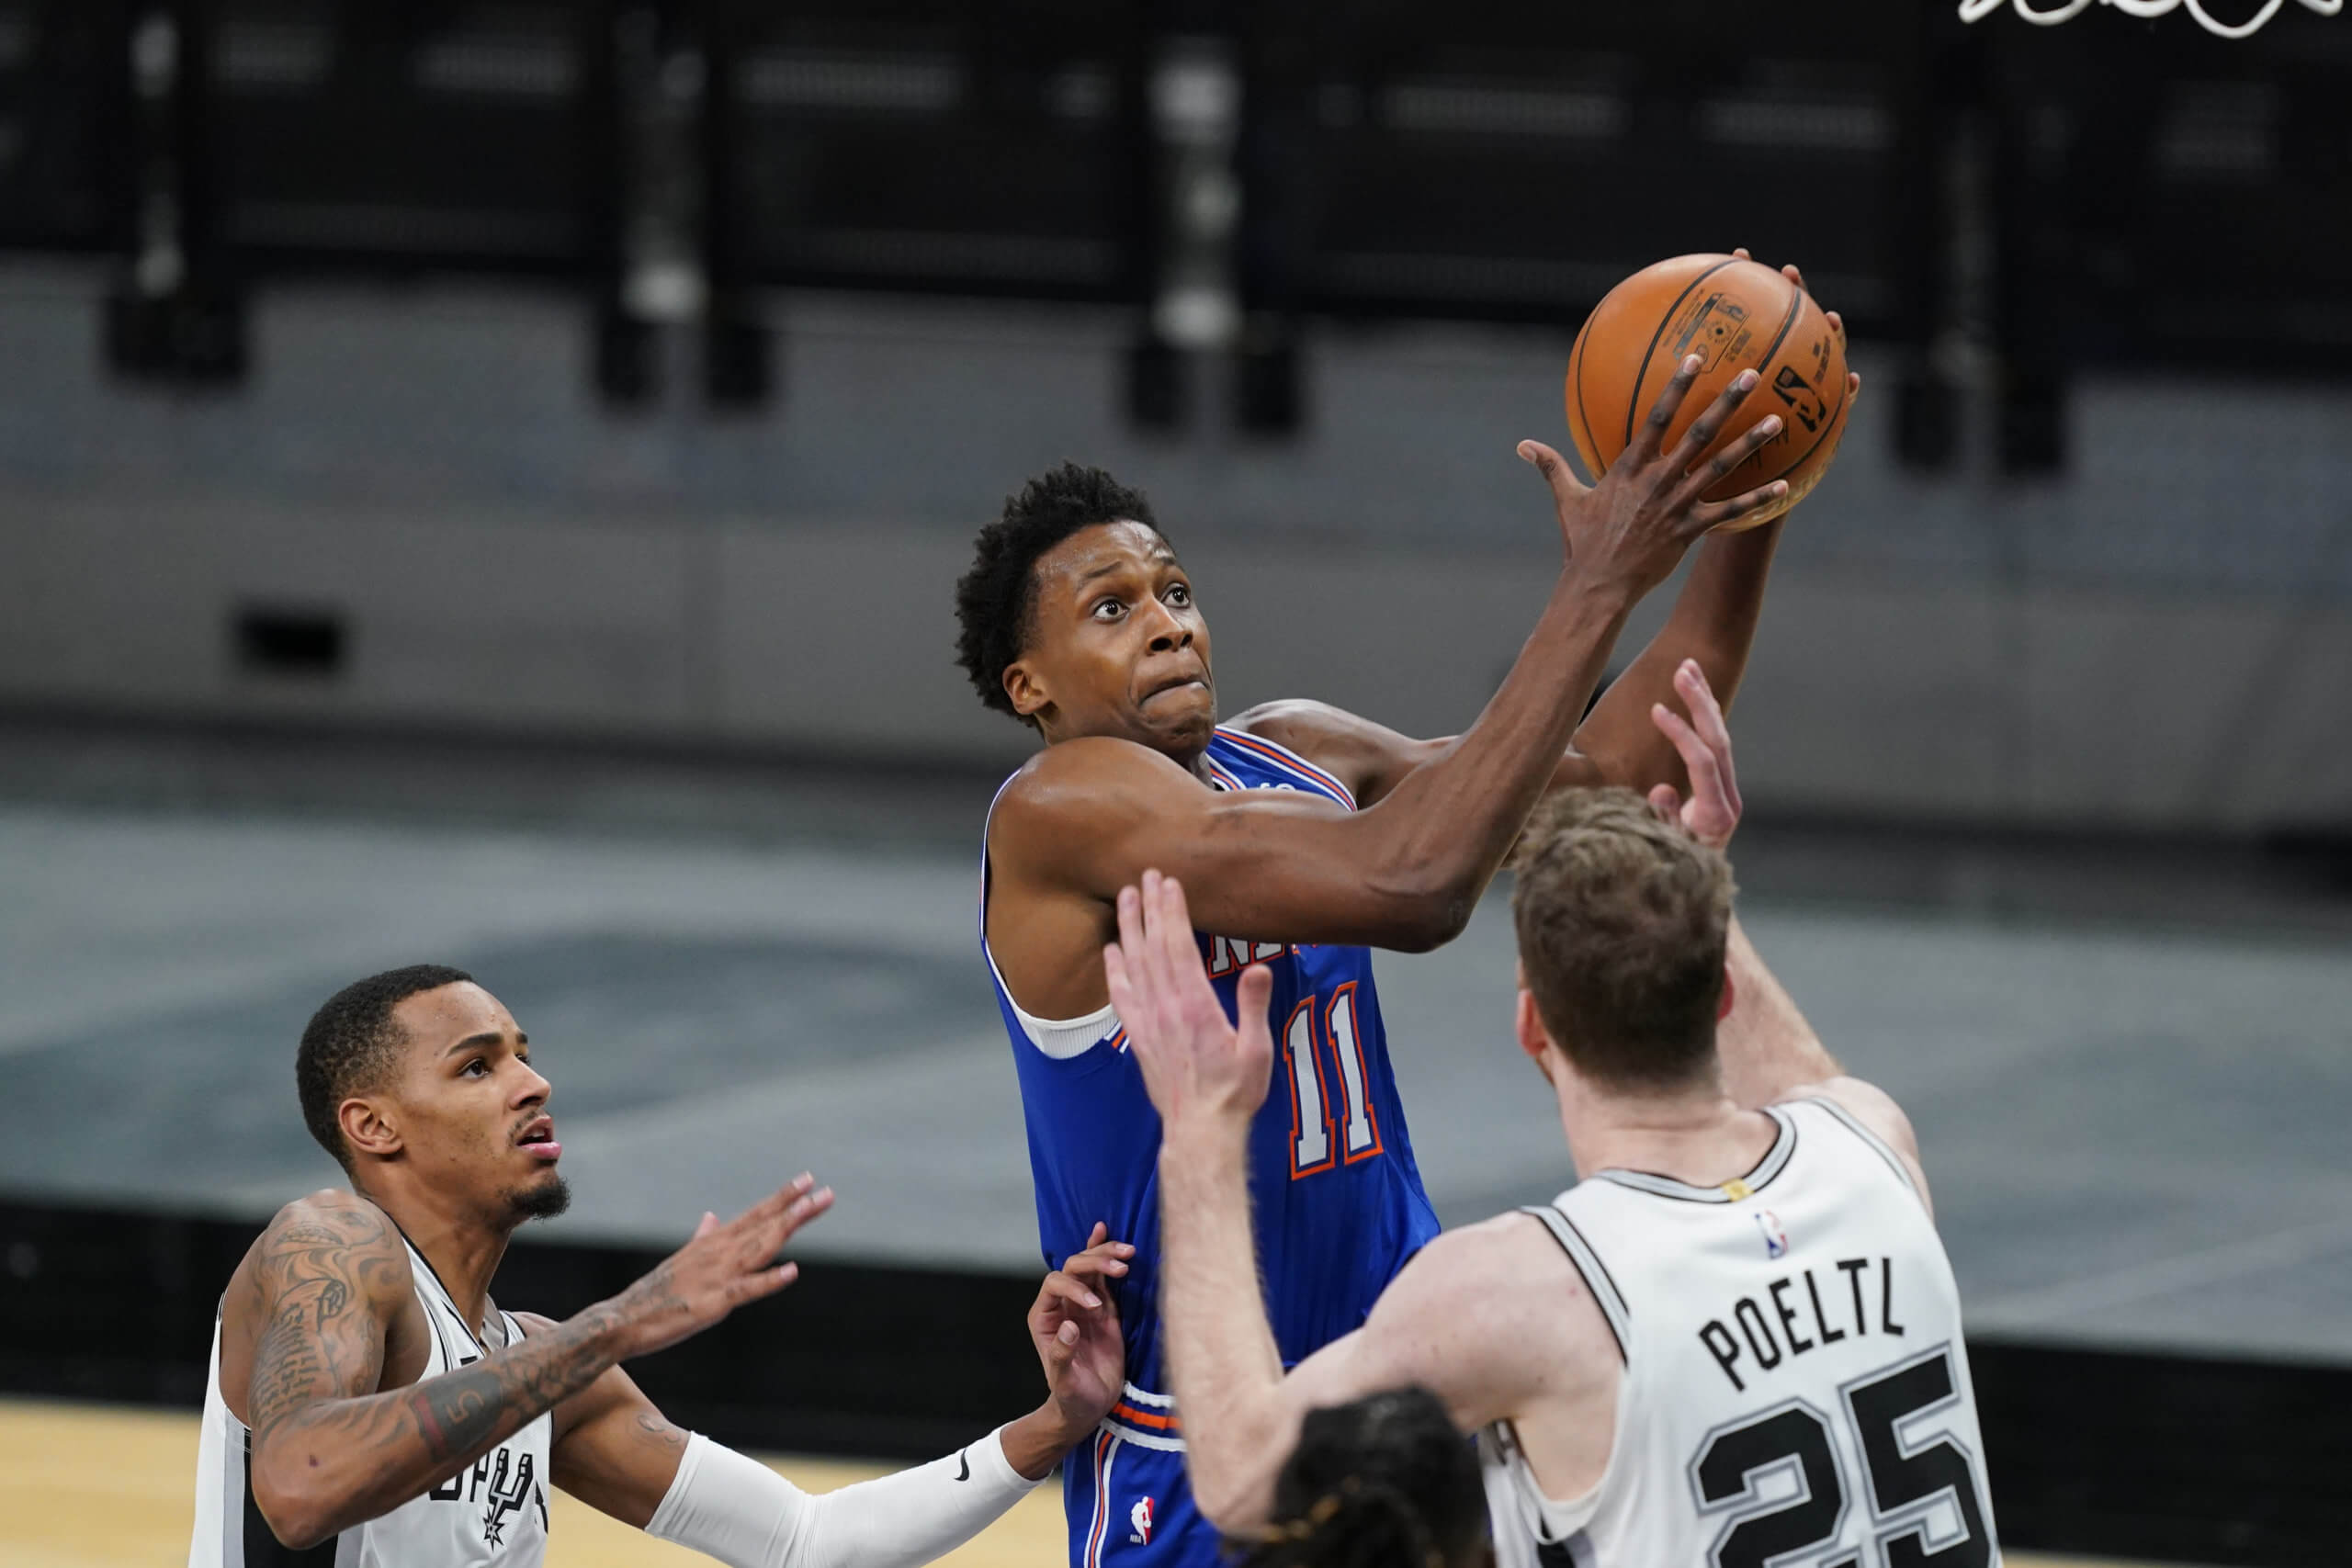 NBA trade rumors: Frank Ntilikina 'extremely happy' with Knicks, doesn't  want to be moved